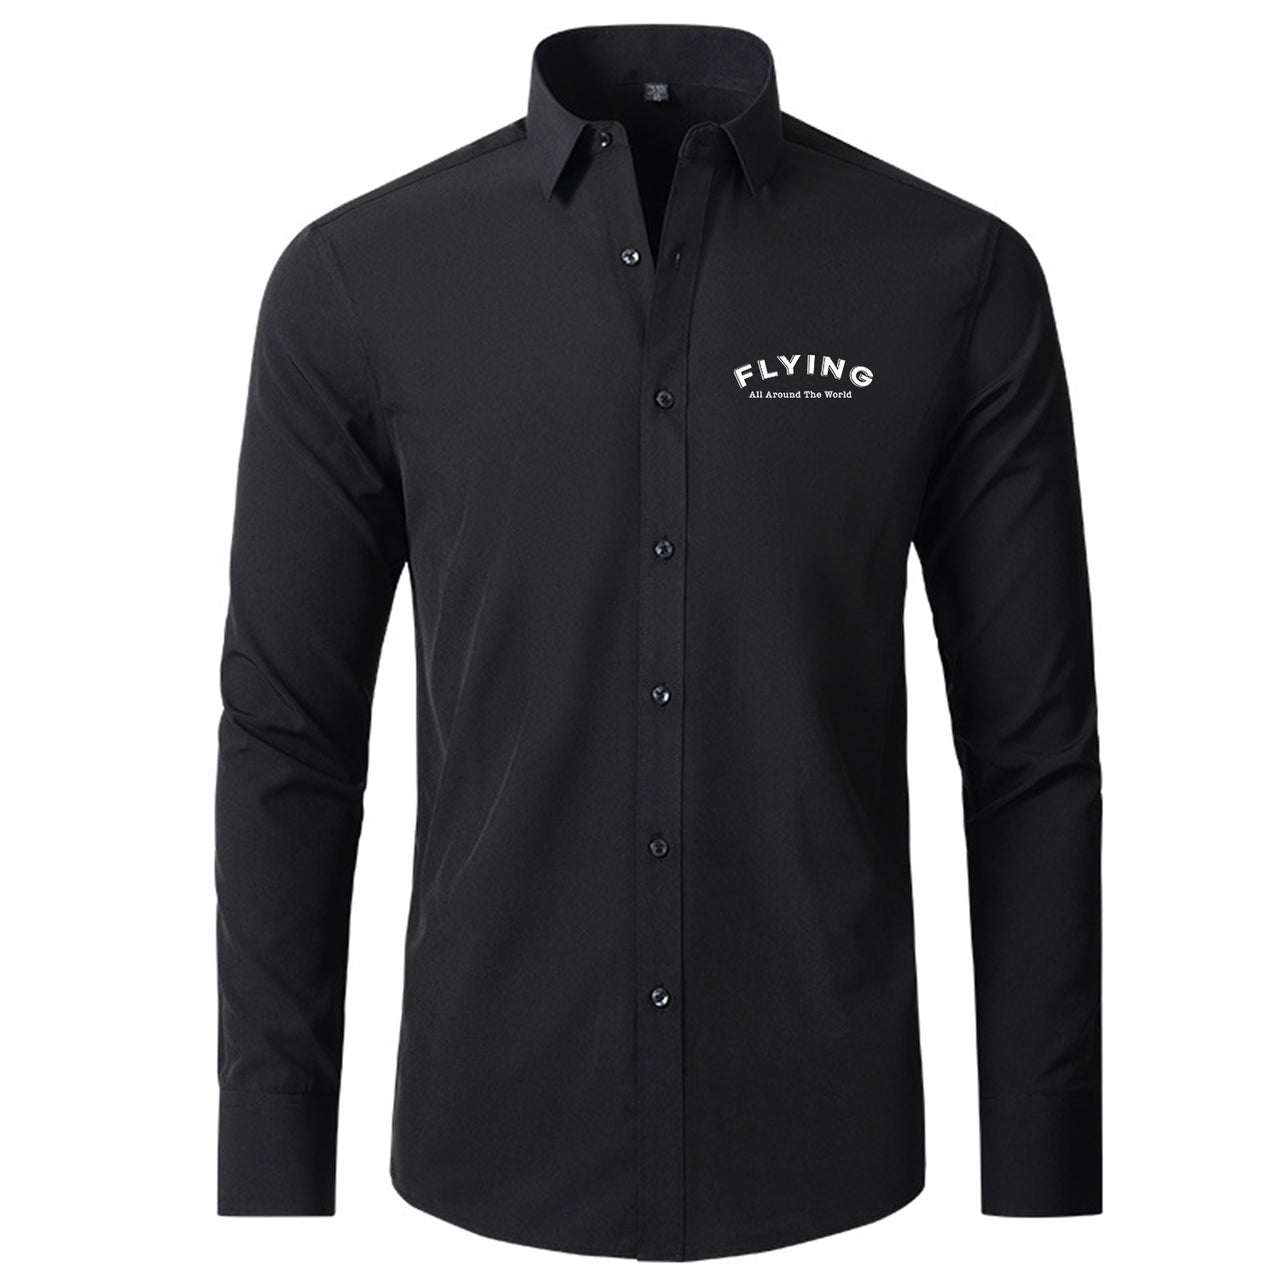 Flying All Around The World Designed Long Sleeve Shirts